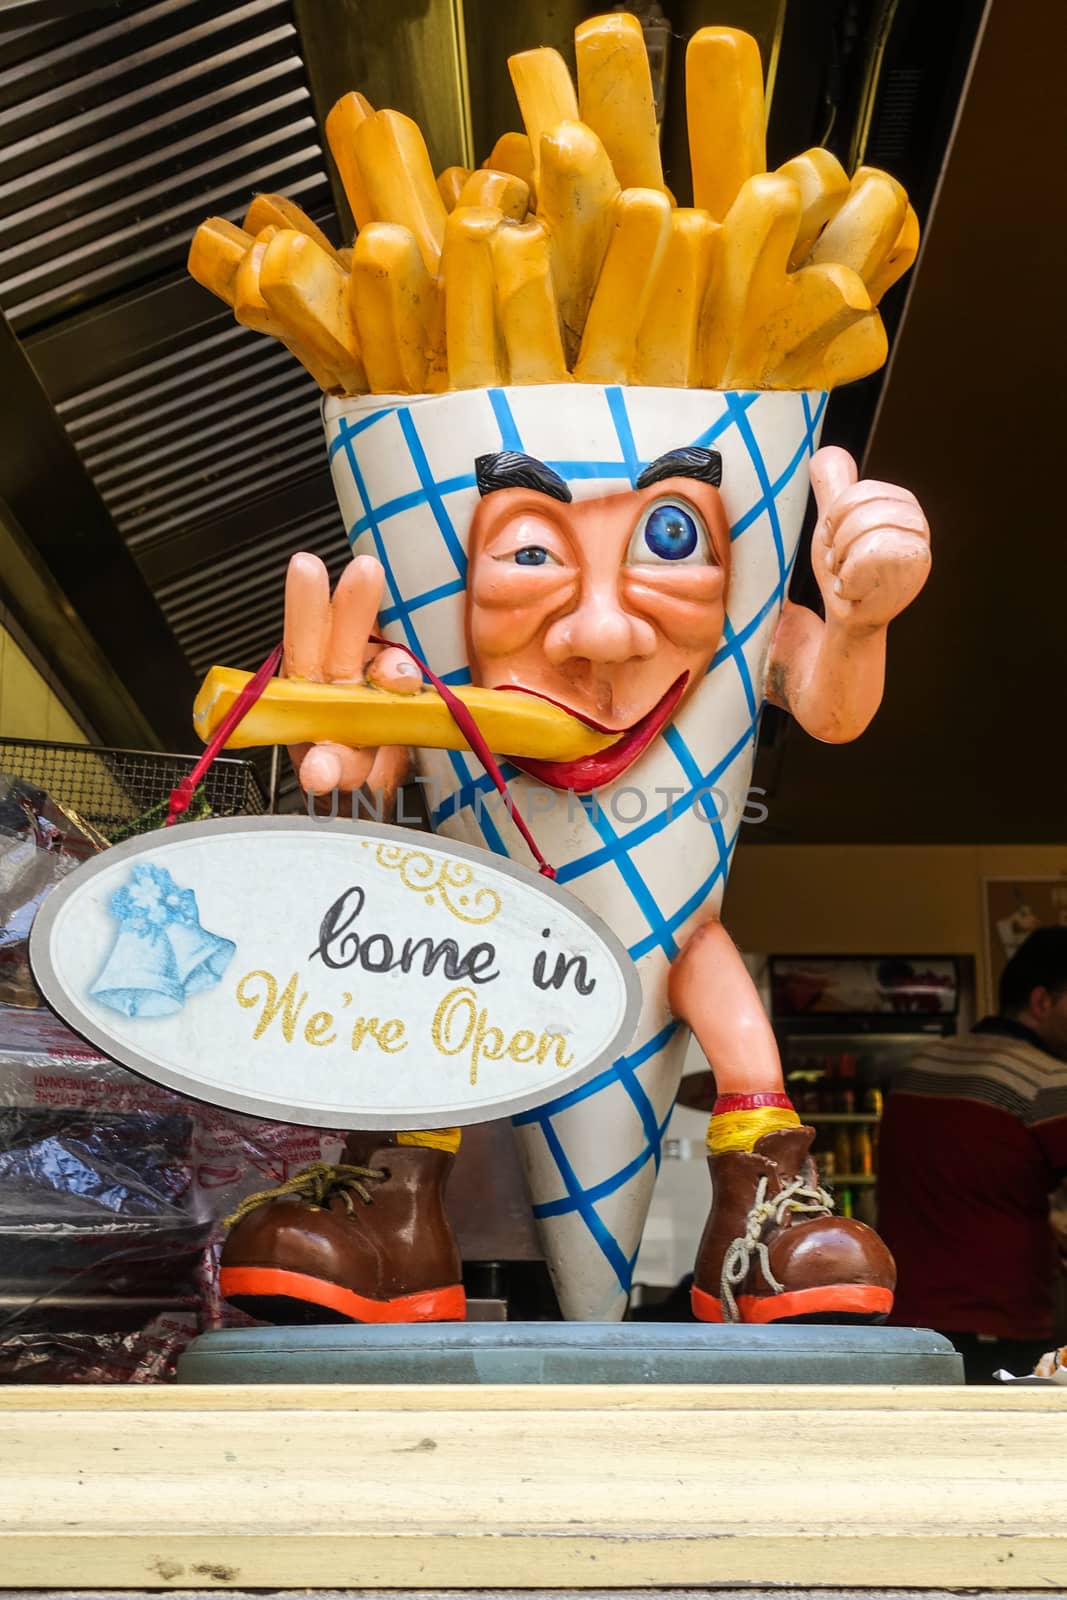 Bruges, Flanders, Belgium -  June 17, 2019: Closeup of colorful French Fries sculpture with human face and arms and legs set in window of fast food restaurant.